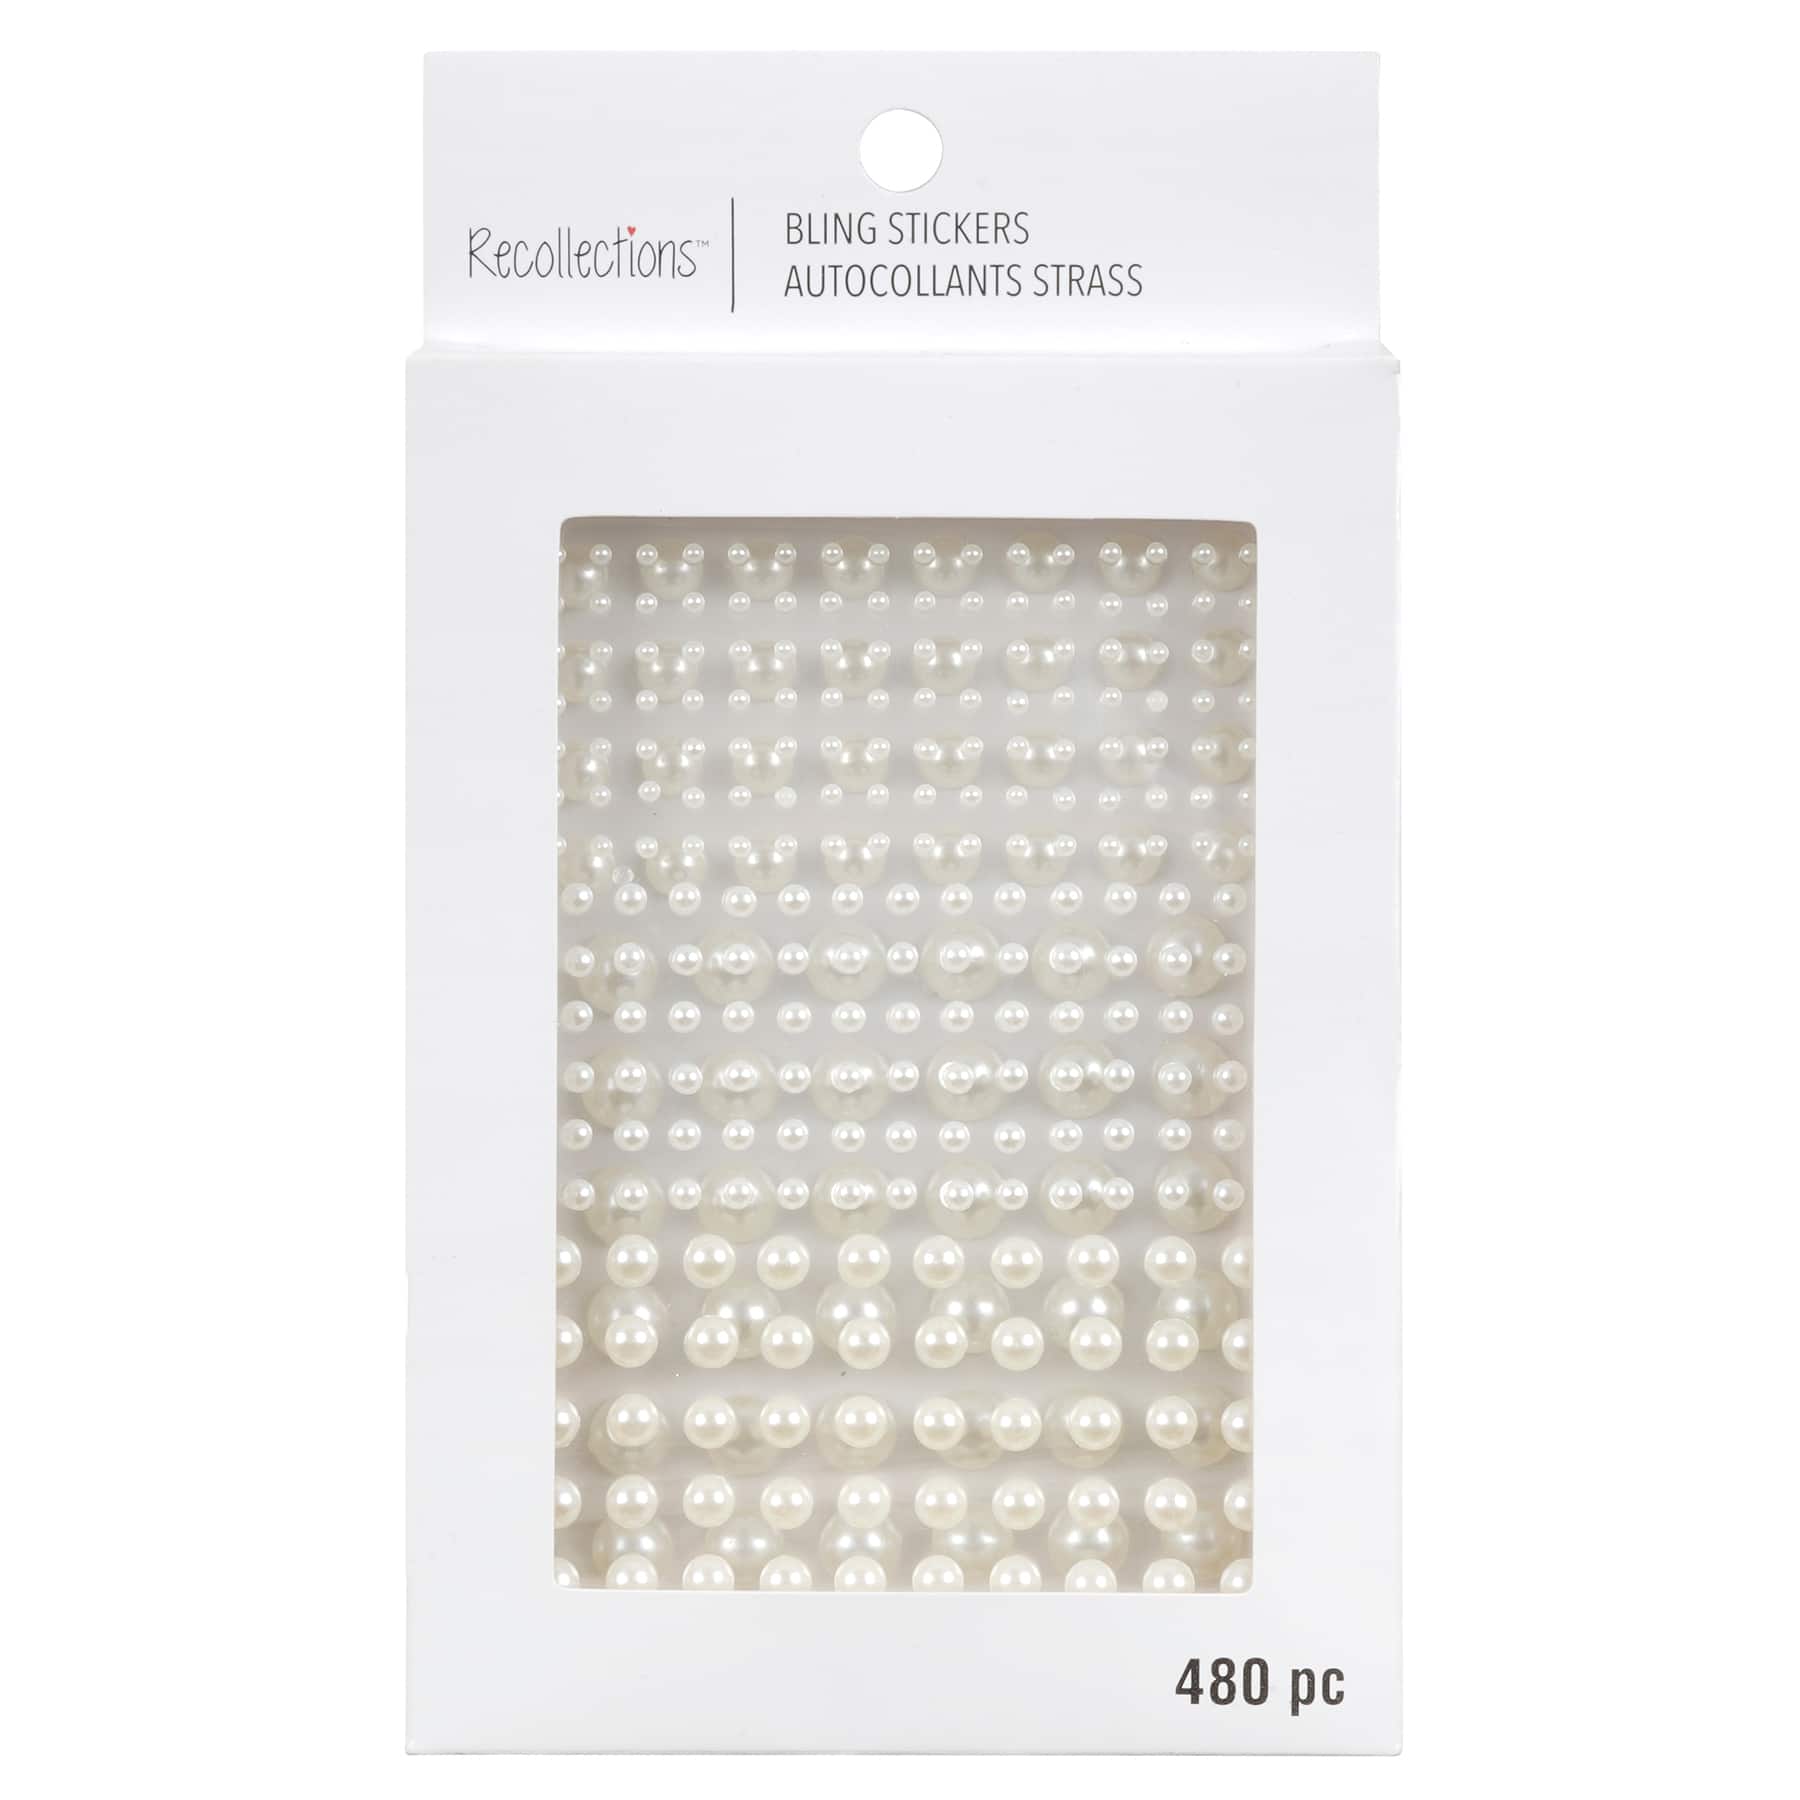 Senkary 840 Pieces (5 Sizes) Flat Back Pearl Sticker Self-Adhesive Half Round Pearl Bead Sheets for Crafts, 4mm/5mm/6mm/8mm/10mm